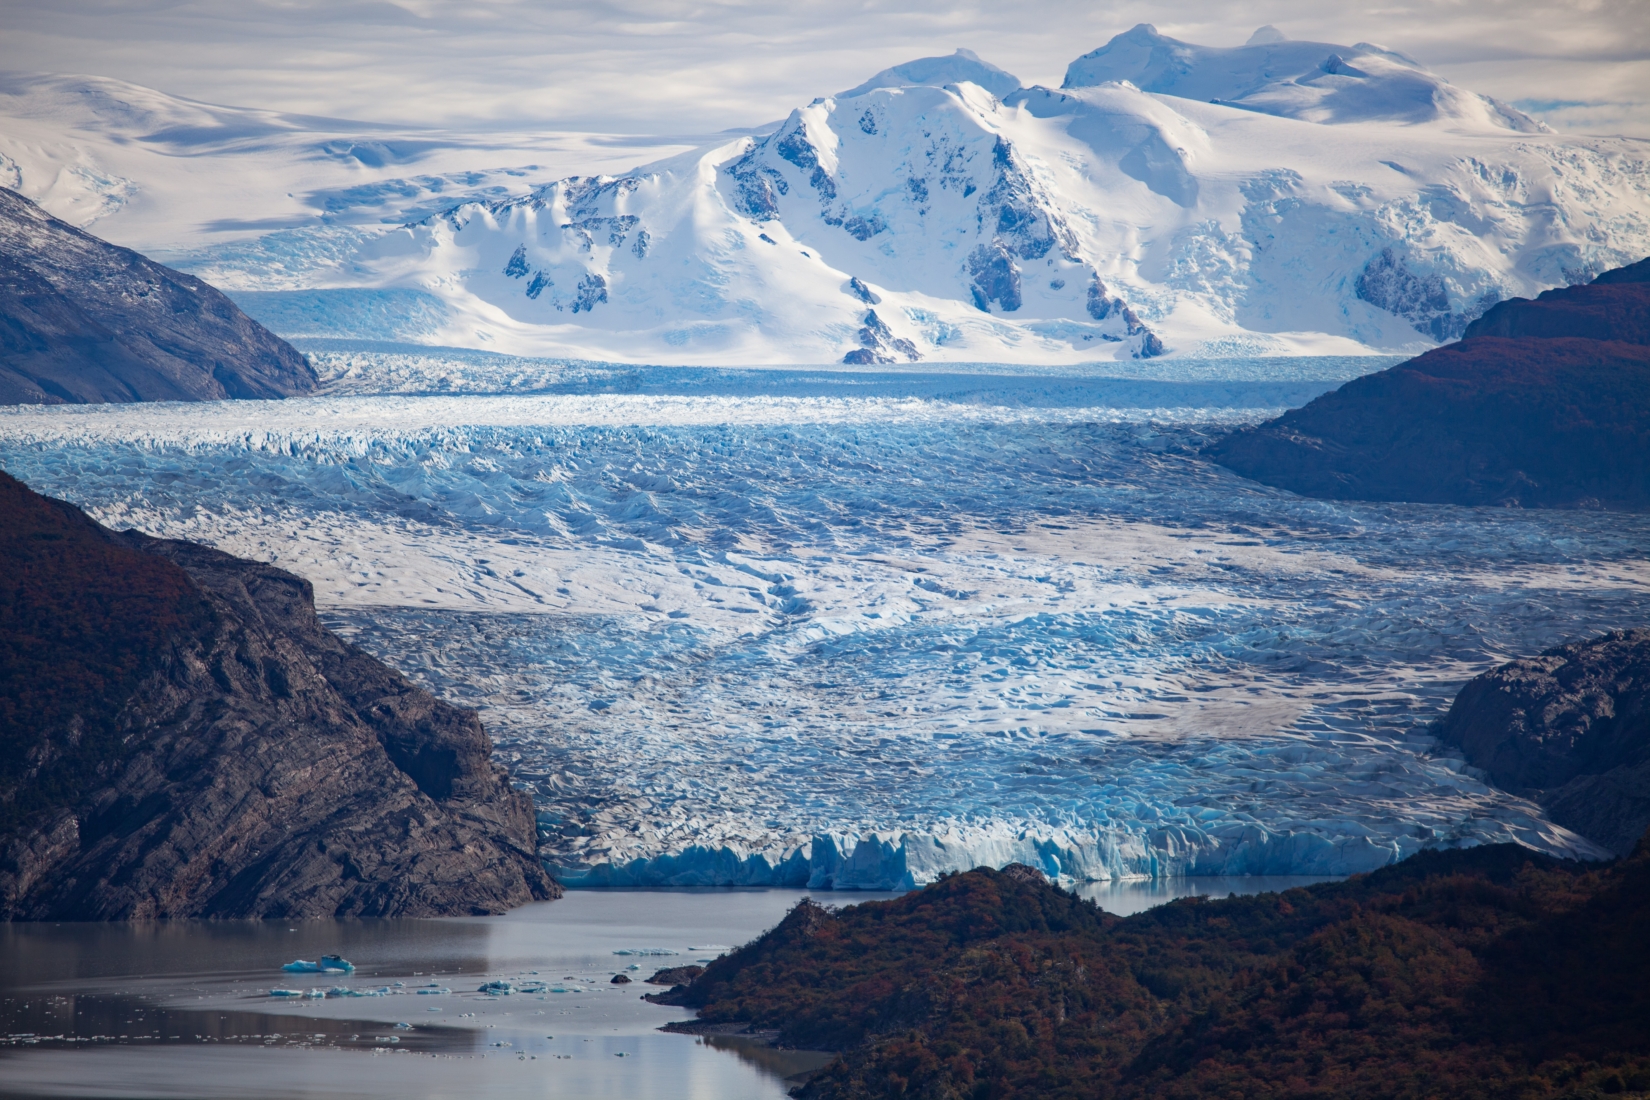 A distance photograph of Grey Glacier (Glaciar Grey), at the west end of the W Circuit in Torres del Paine National Park